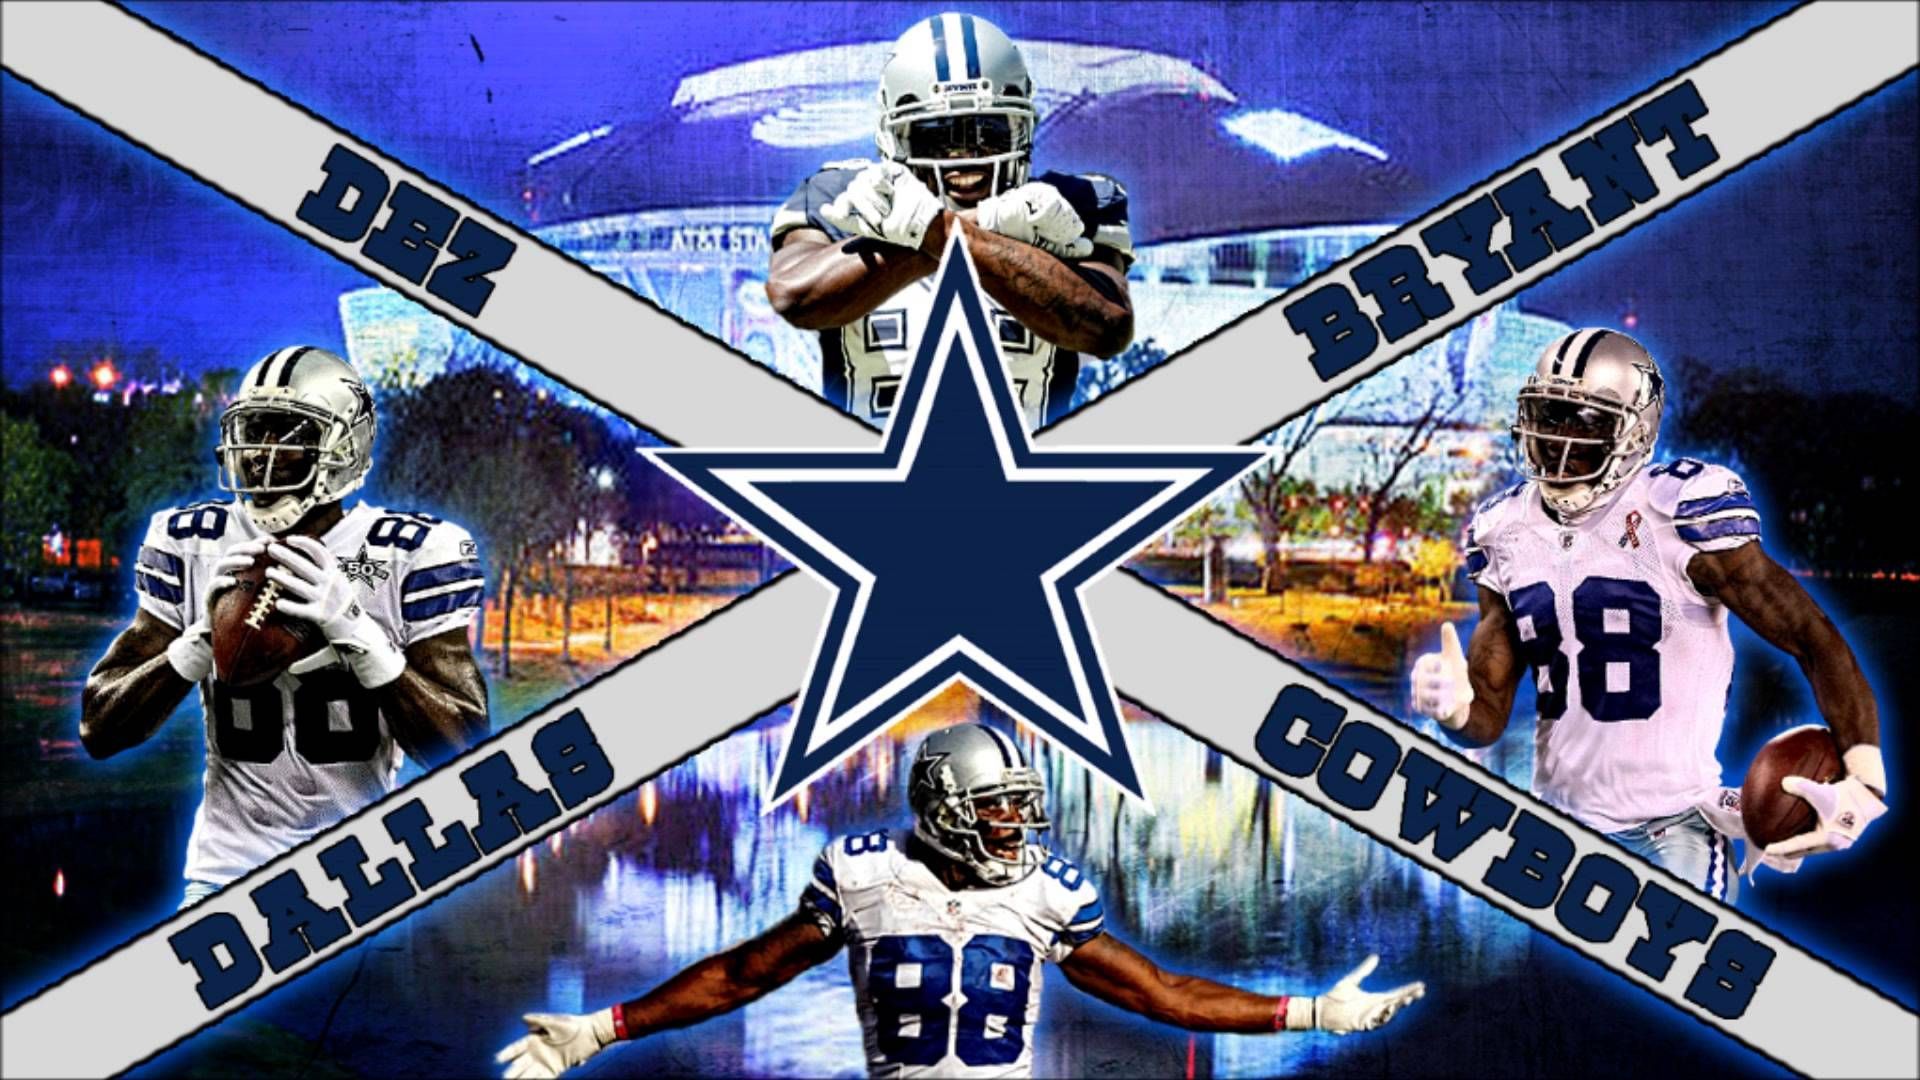 Best image about Dallas Cowboys Wallpaper. Tony. Dallas cowboys wallpaper, Dallas cowboys, Dallas cowboys wallpaper iphone